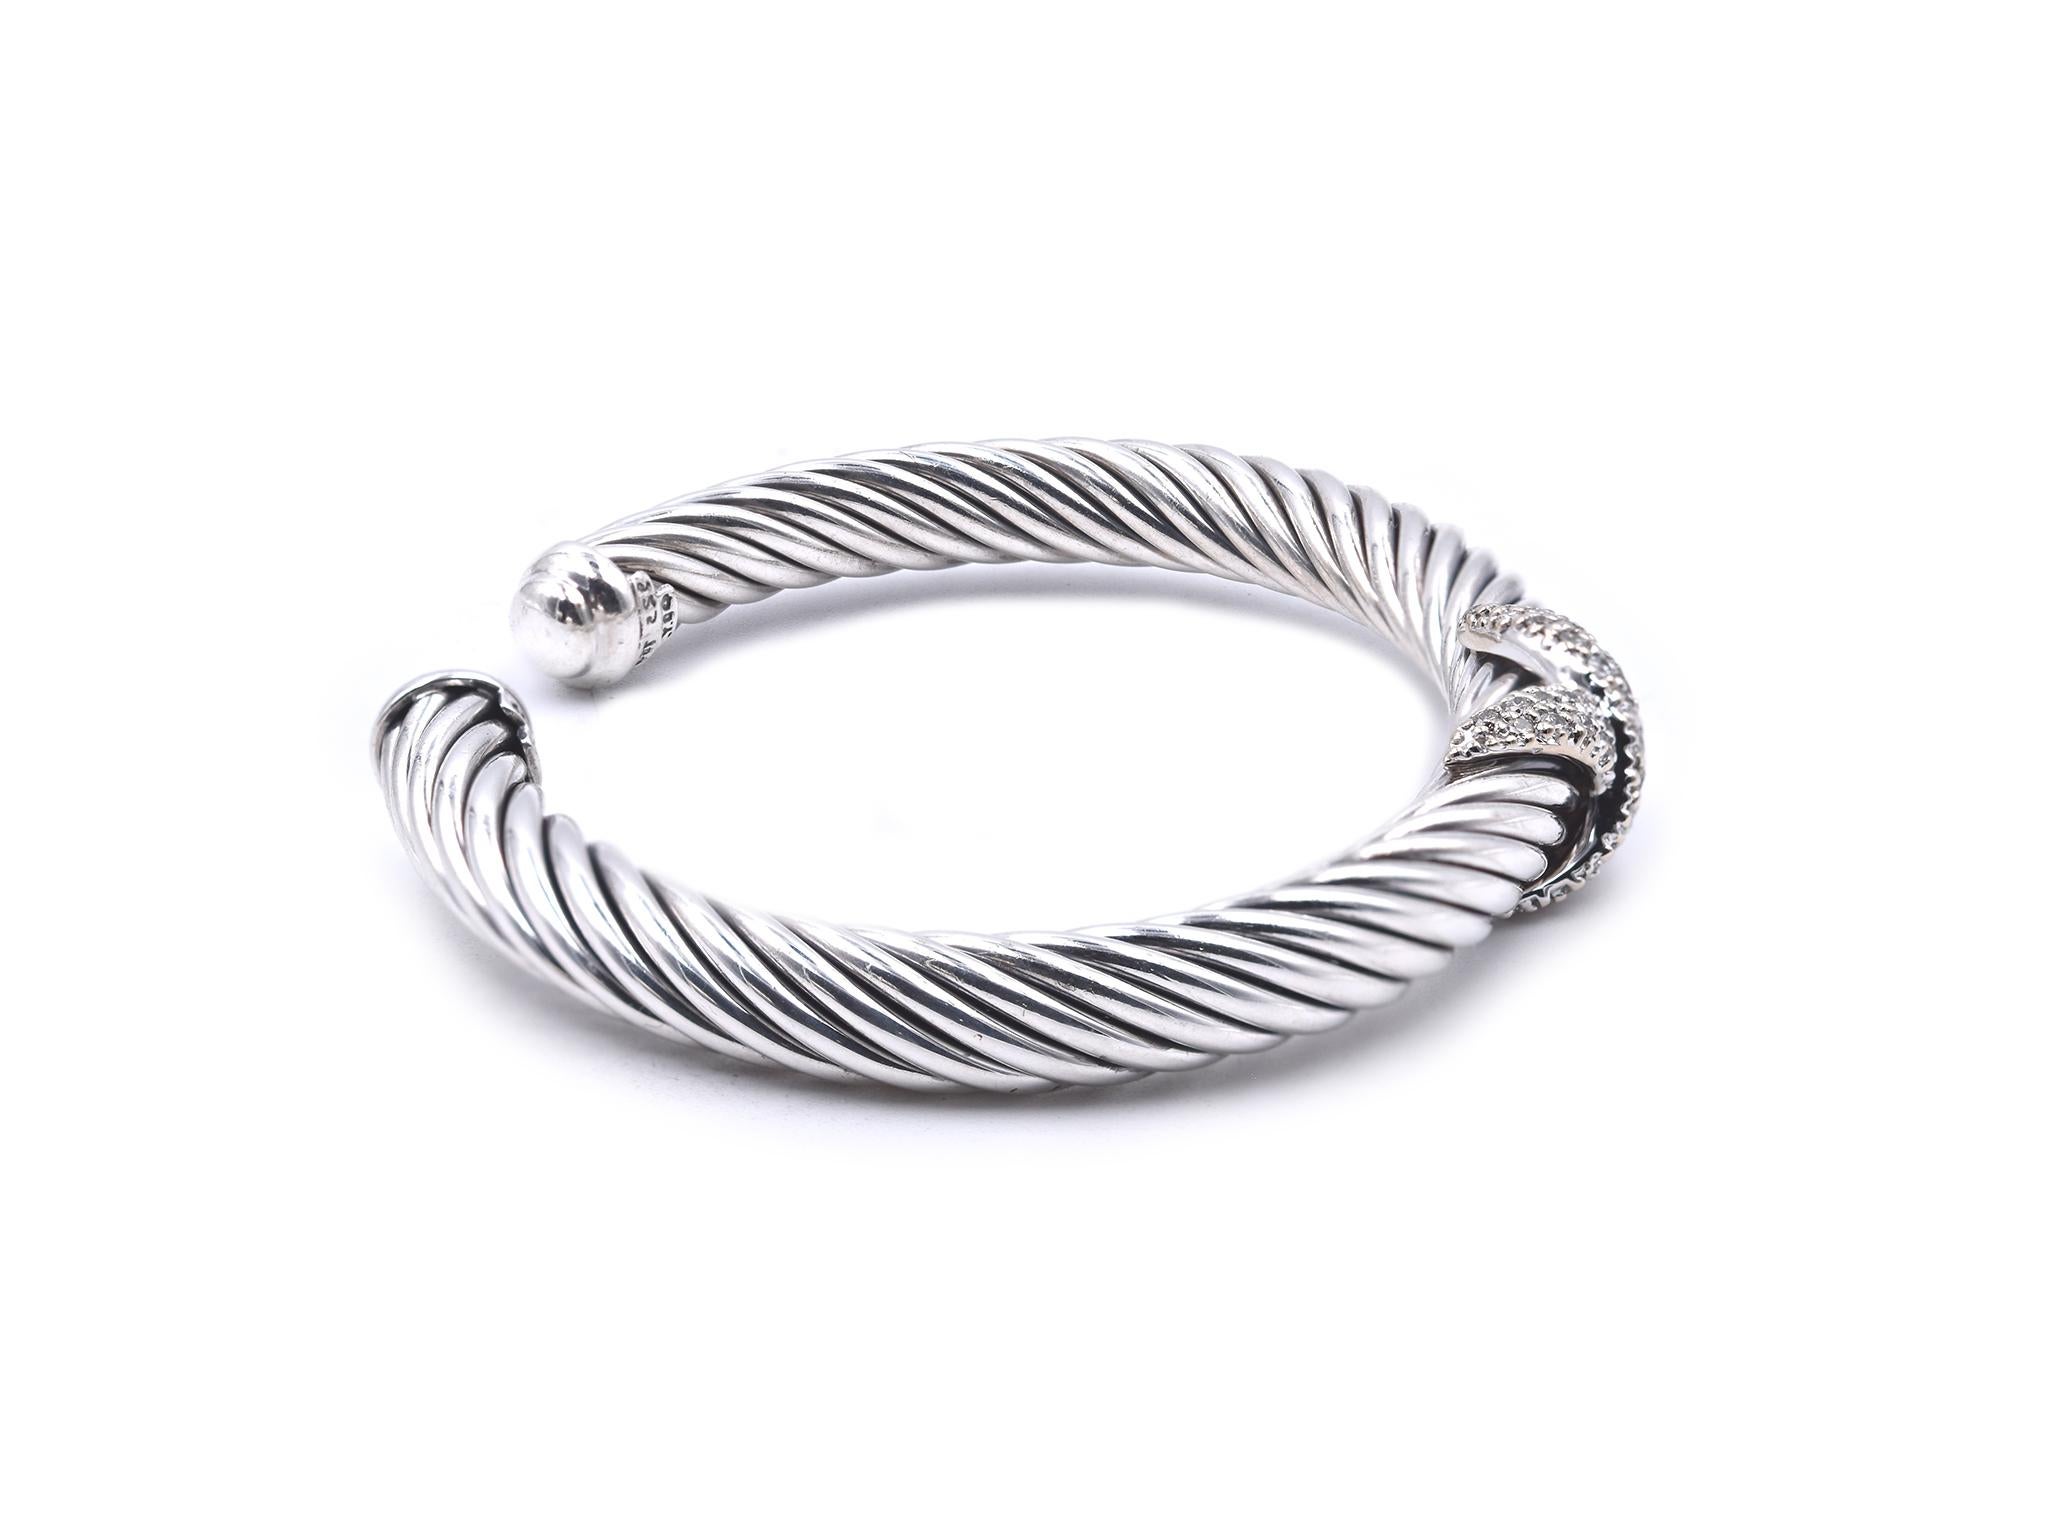 Designer: David Yurman
Material: sterling silver 
Diamond: 46 round cut = .50cttw
Color: G
Clarity: VS
Weight: 44.39 grams
Measurement: cuff will fit up to a 7-inch wrist
